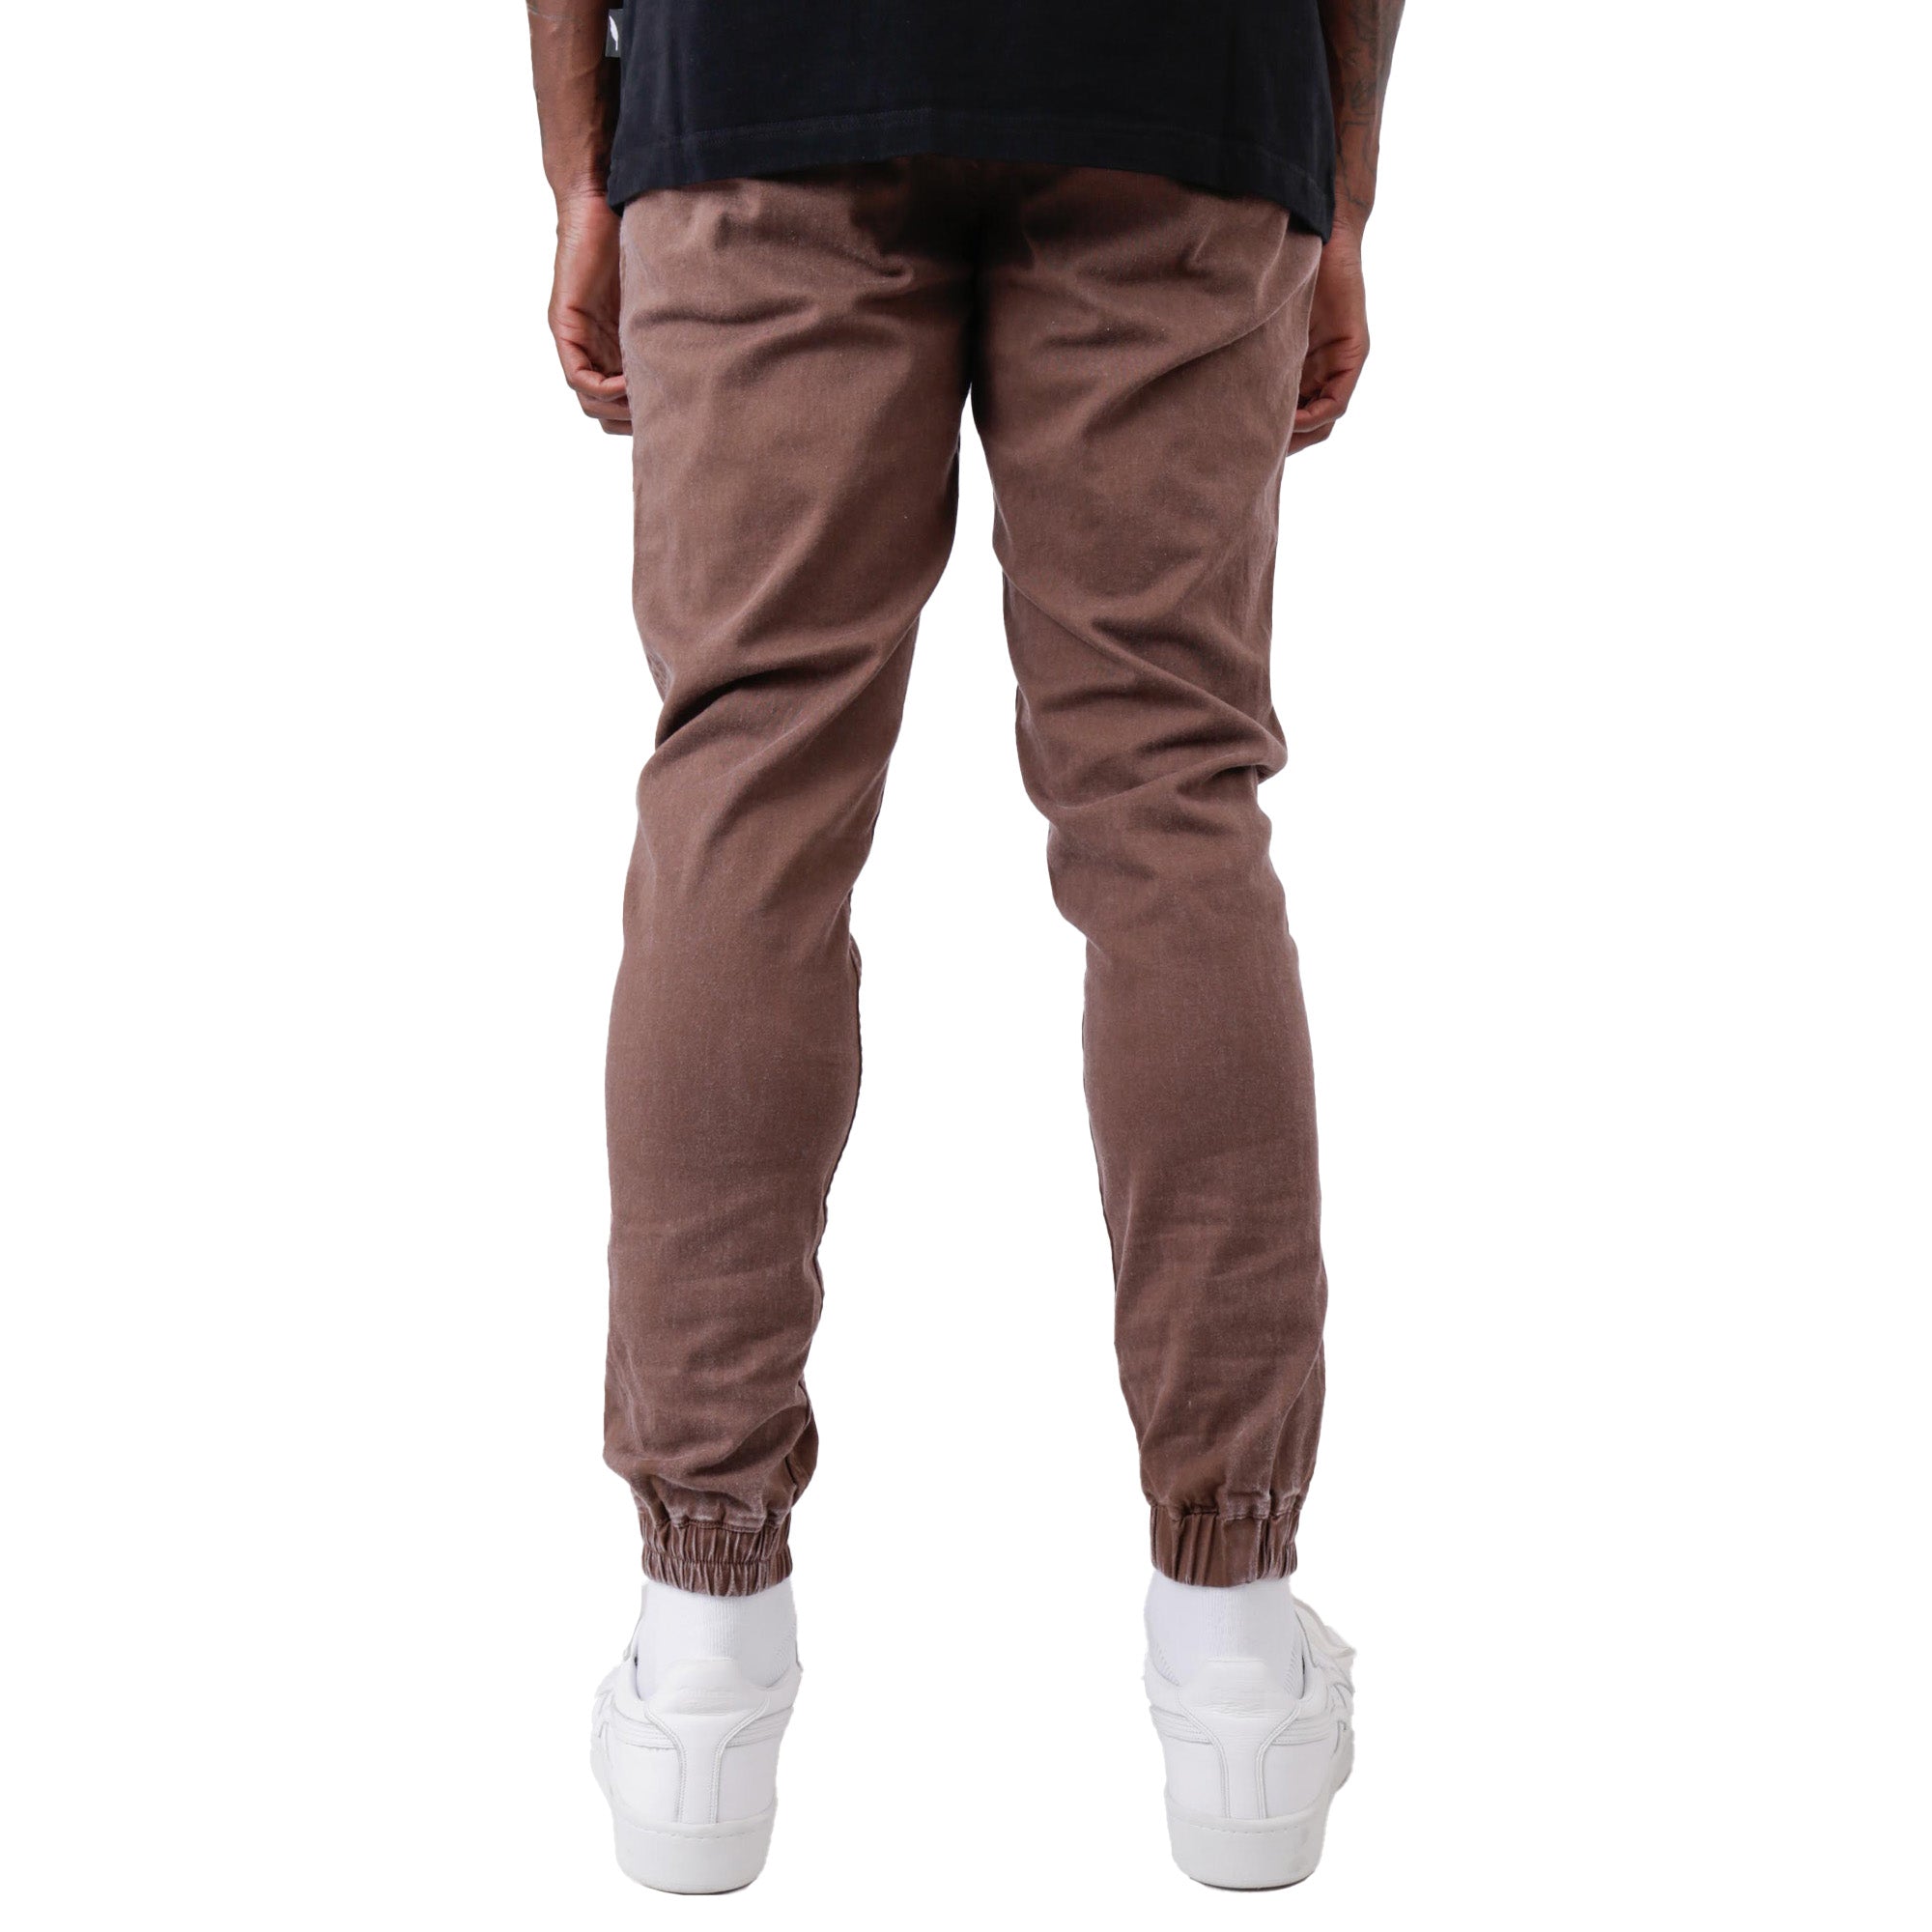 Jeans & Trousers | Street 9 Brown Jogger Pants For Women | Freeup